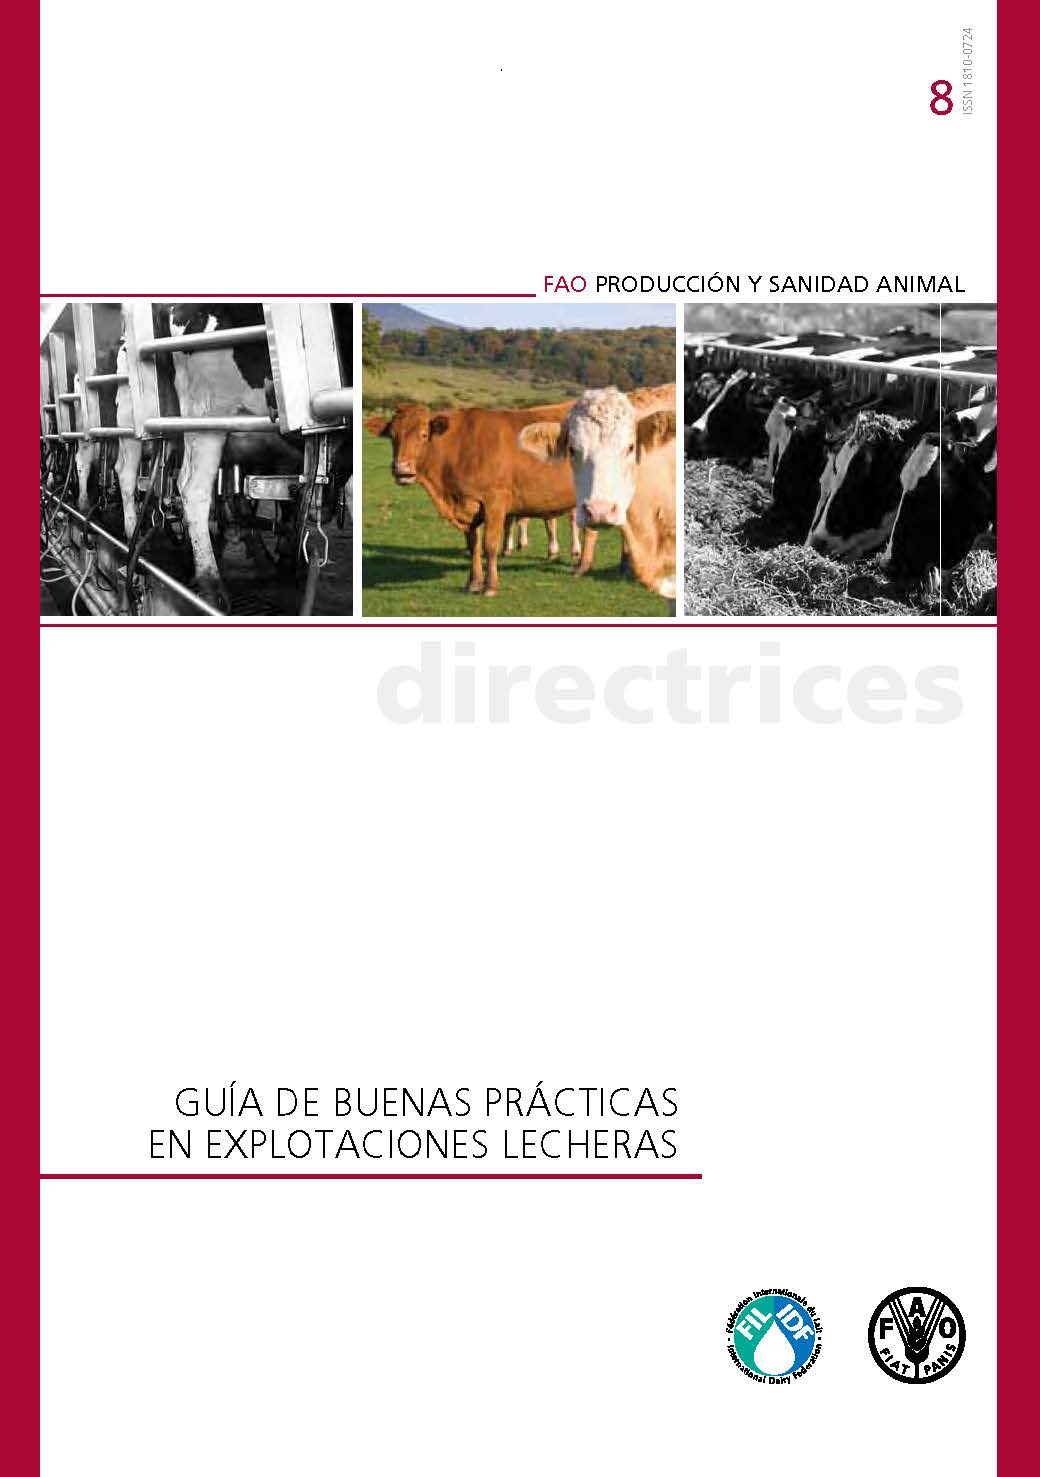 Guide to Good Dairy Farming Practice in Spanish (2011) - FIL-IDF